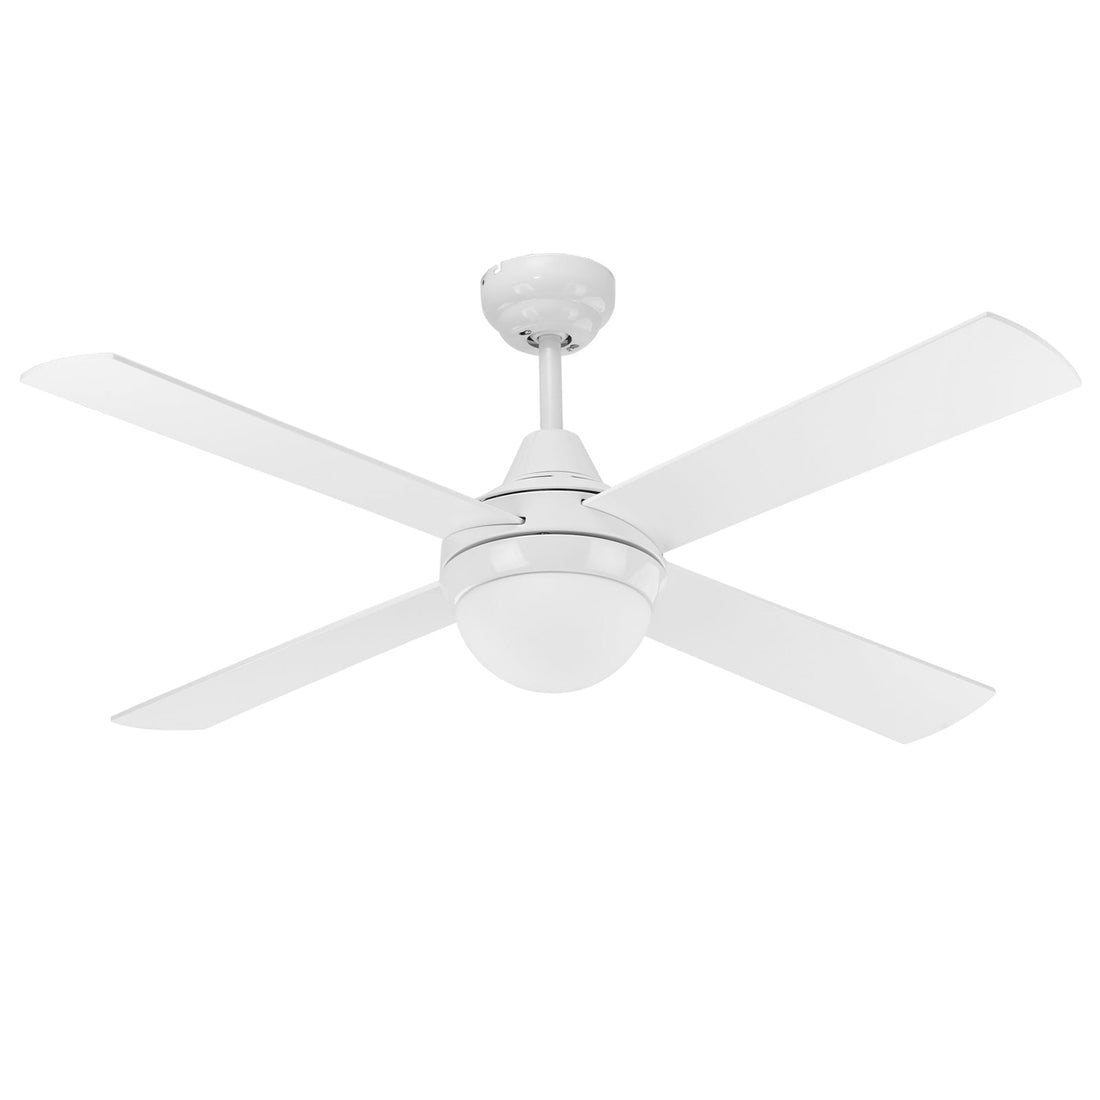 Lonsdale AC Ceiling Fan with Light Mercator